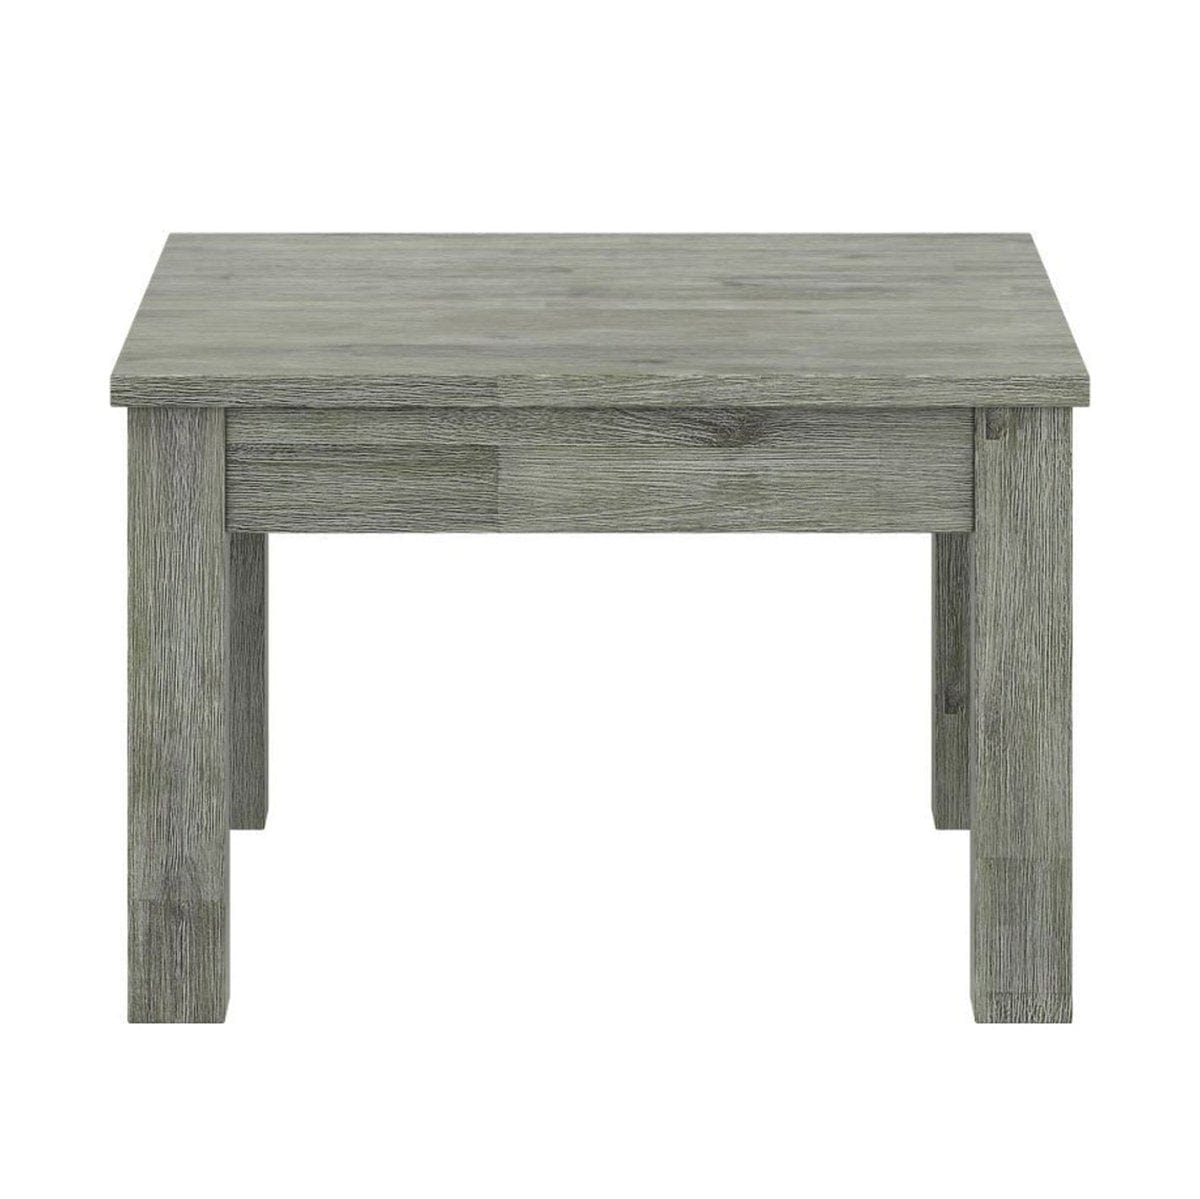 Acacia Phillipe Solid Wood Side Table picket and rail